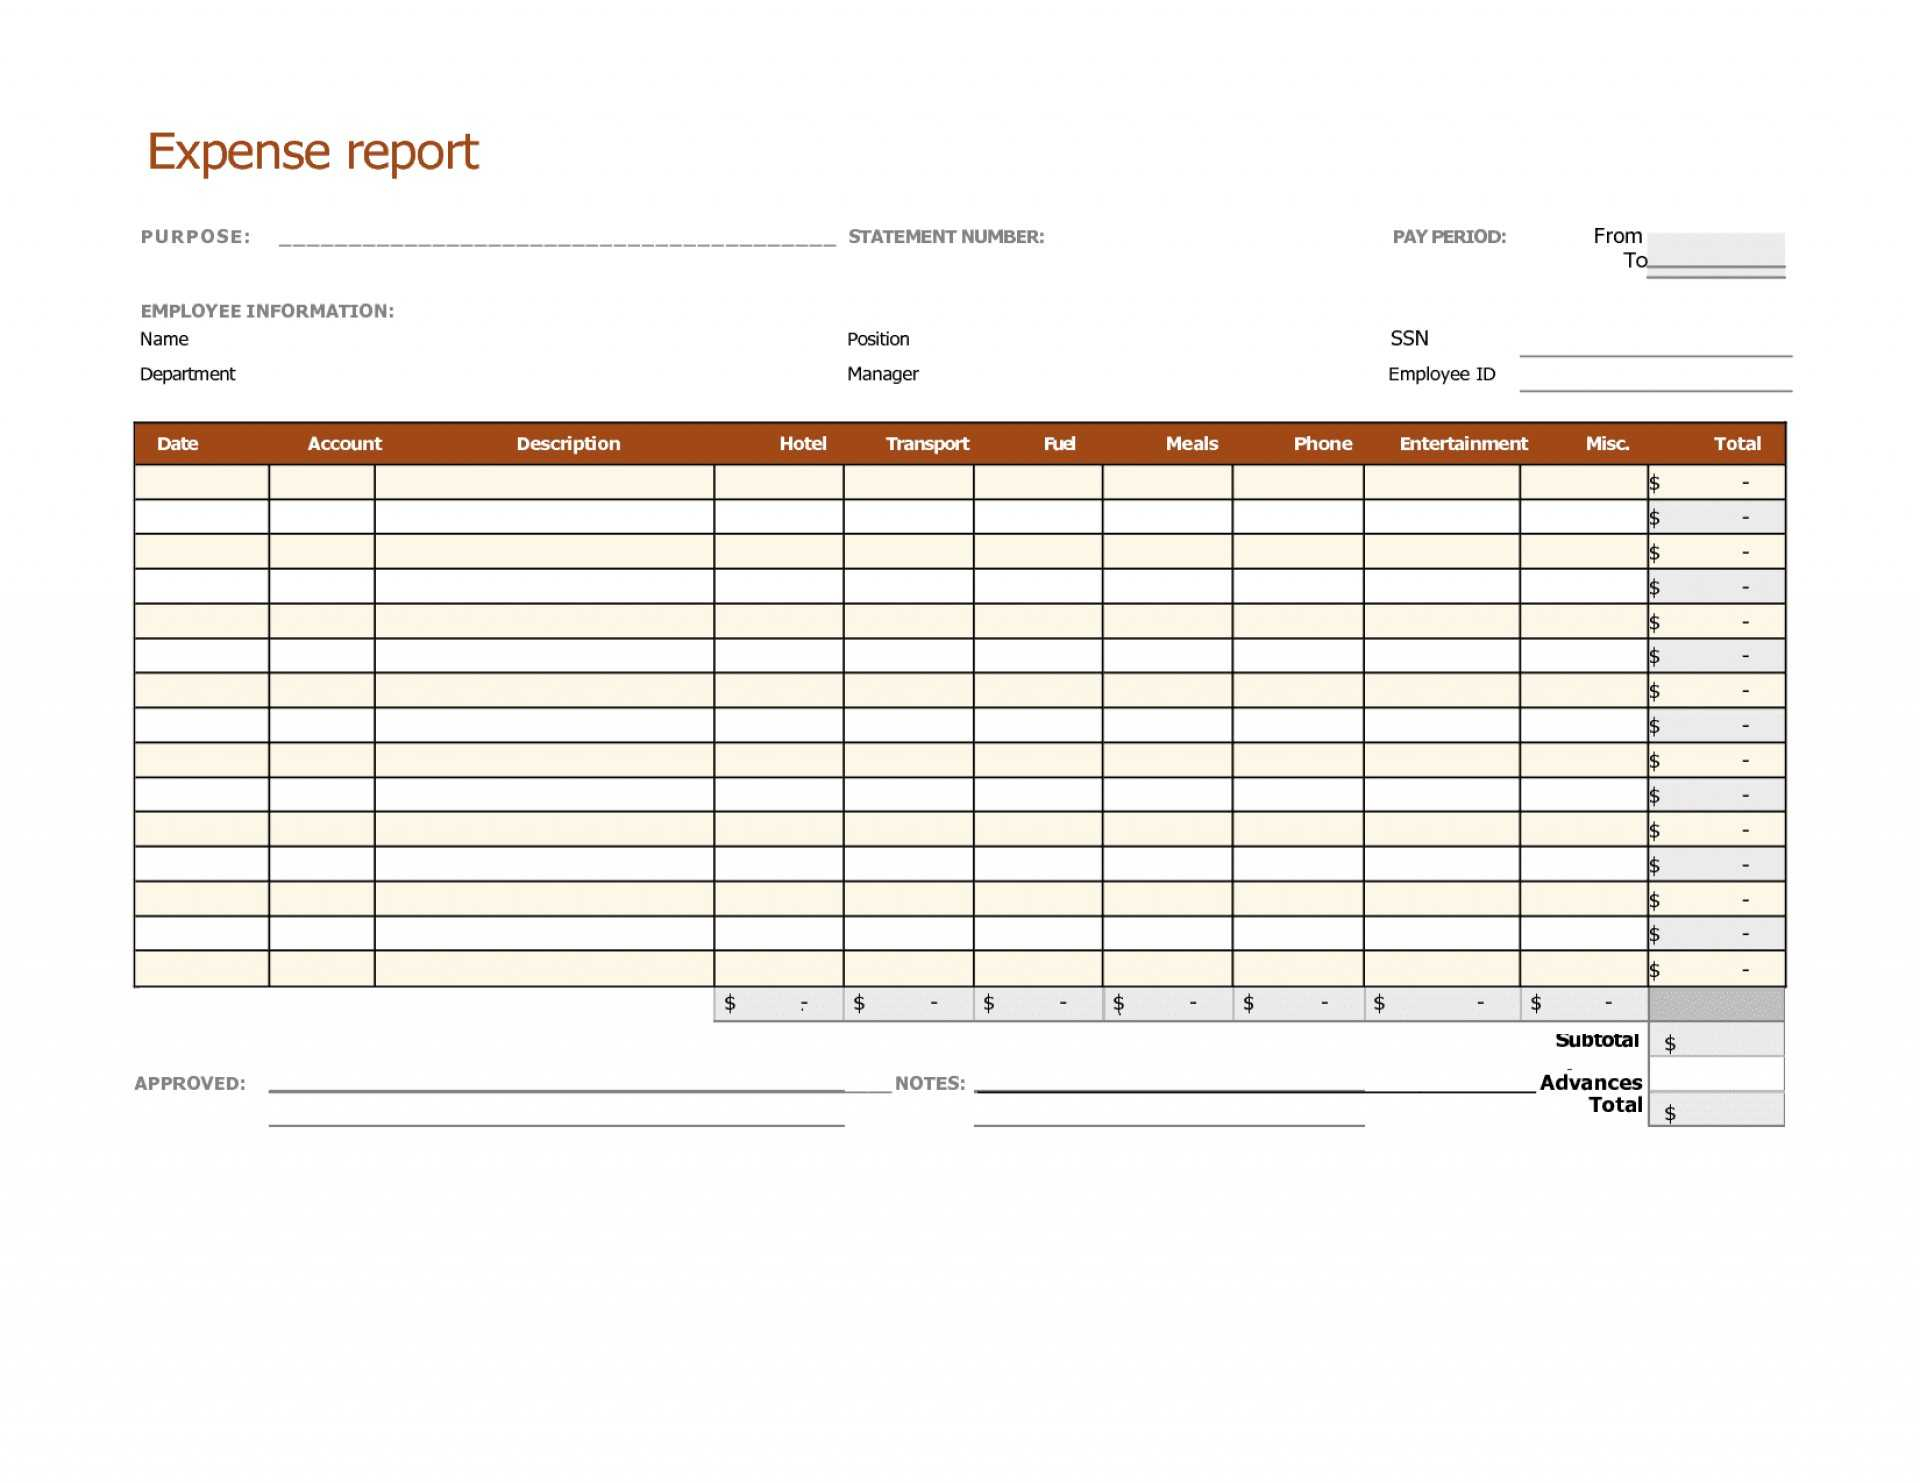 014 Travel Expense Report Template Business Trip Example Pertaining To Business Trip Report Template